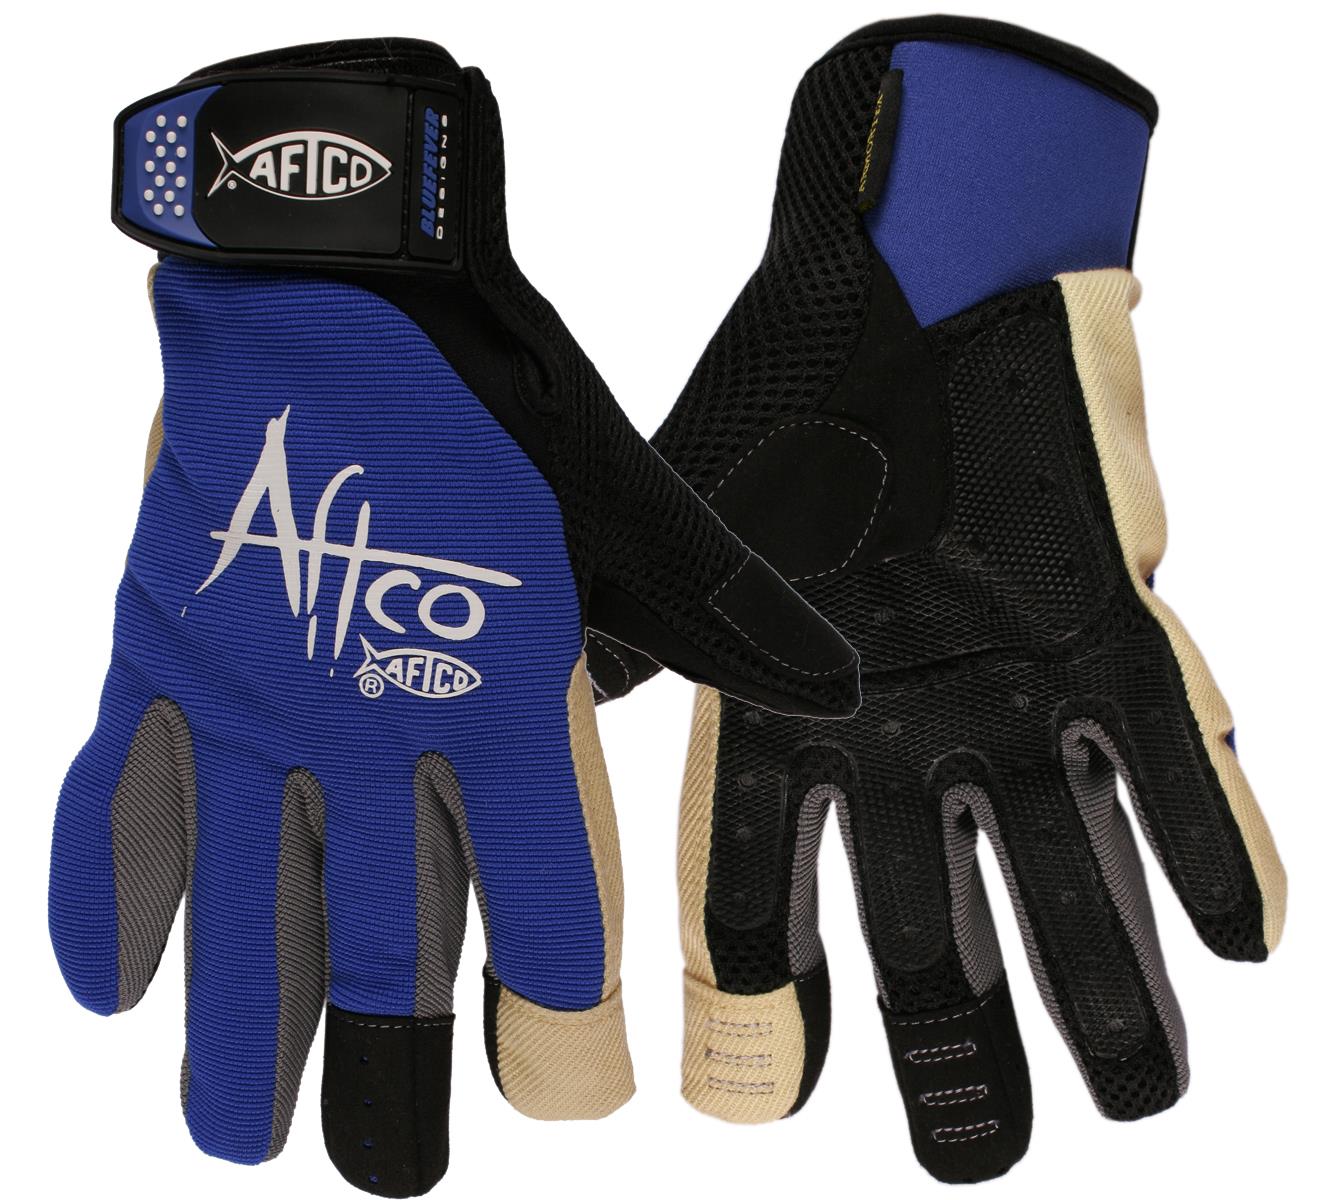 Aftco Fishing Gloves - RELEASE